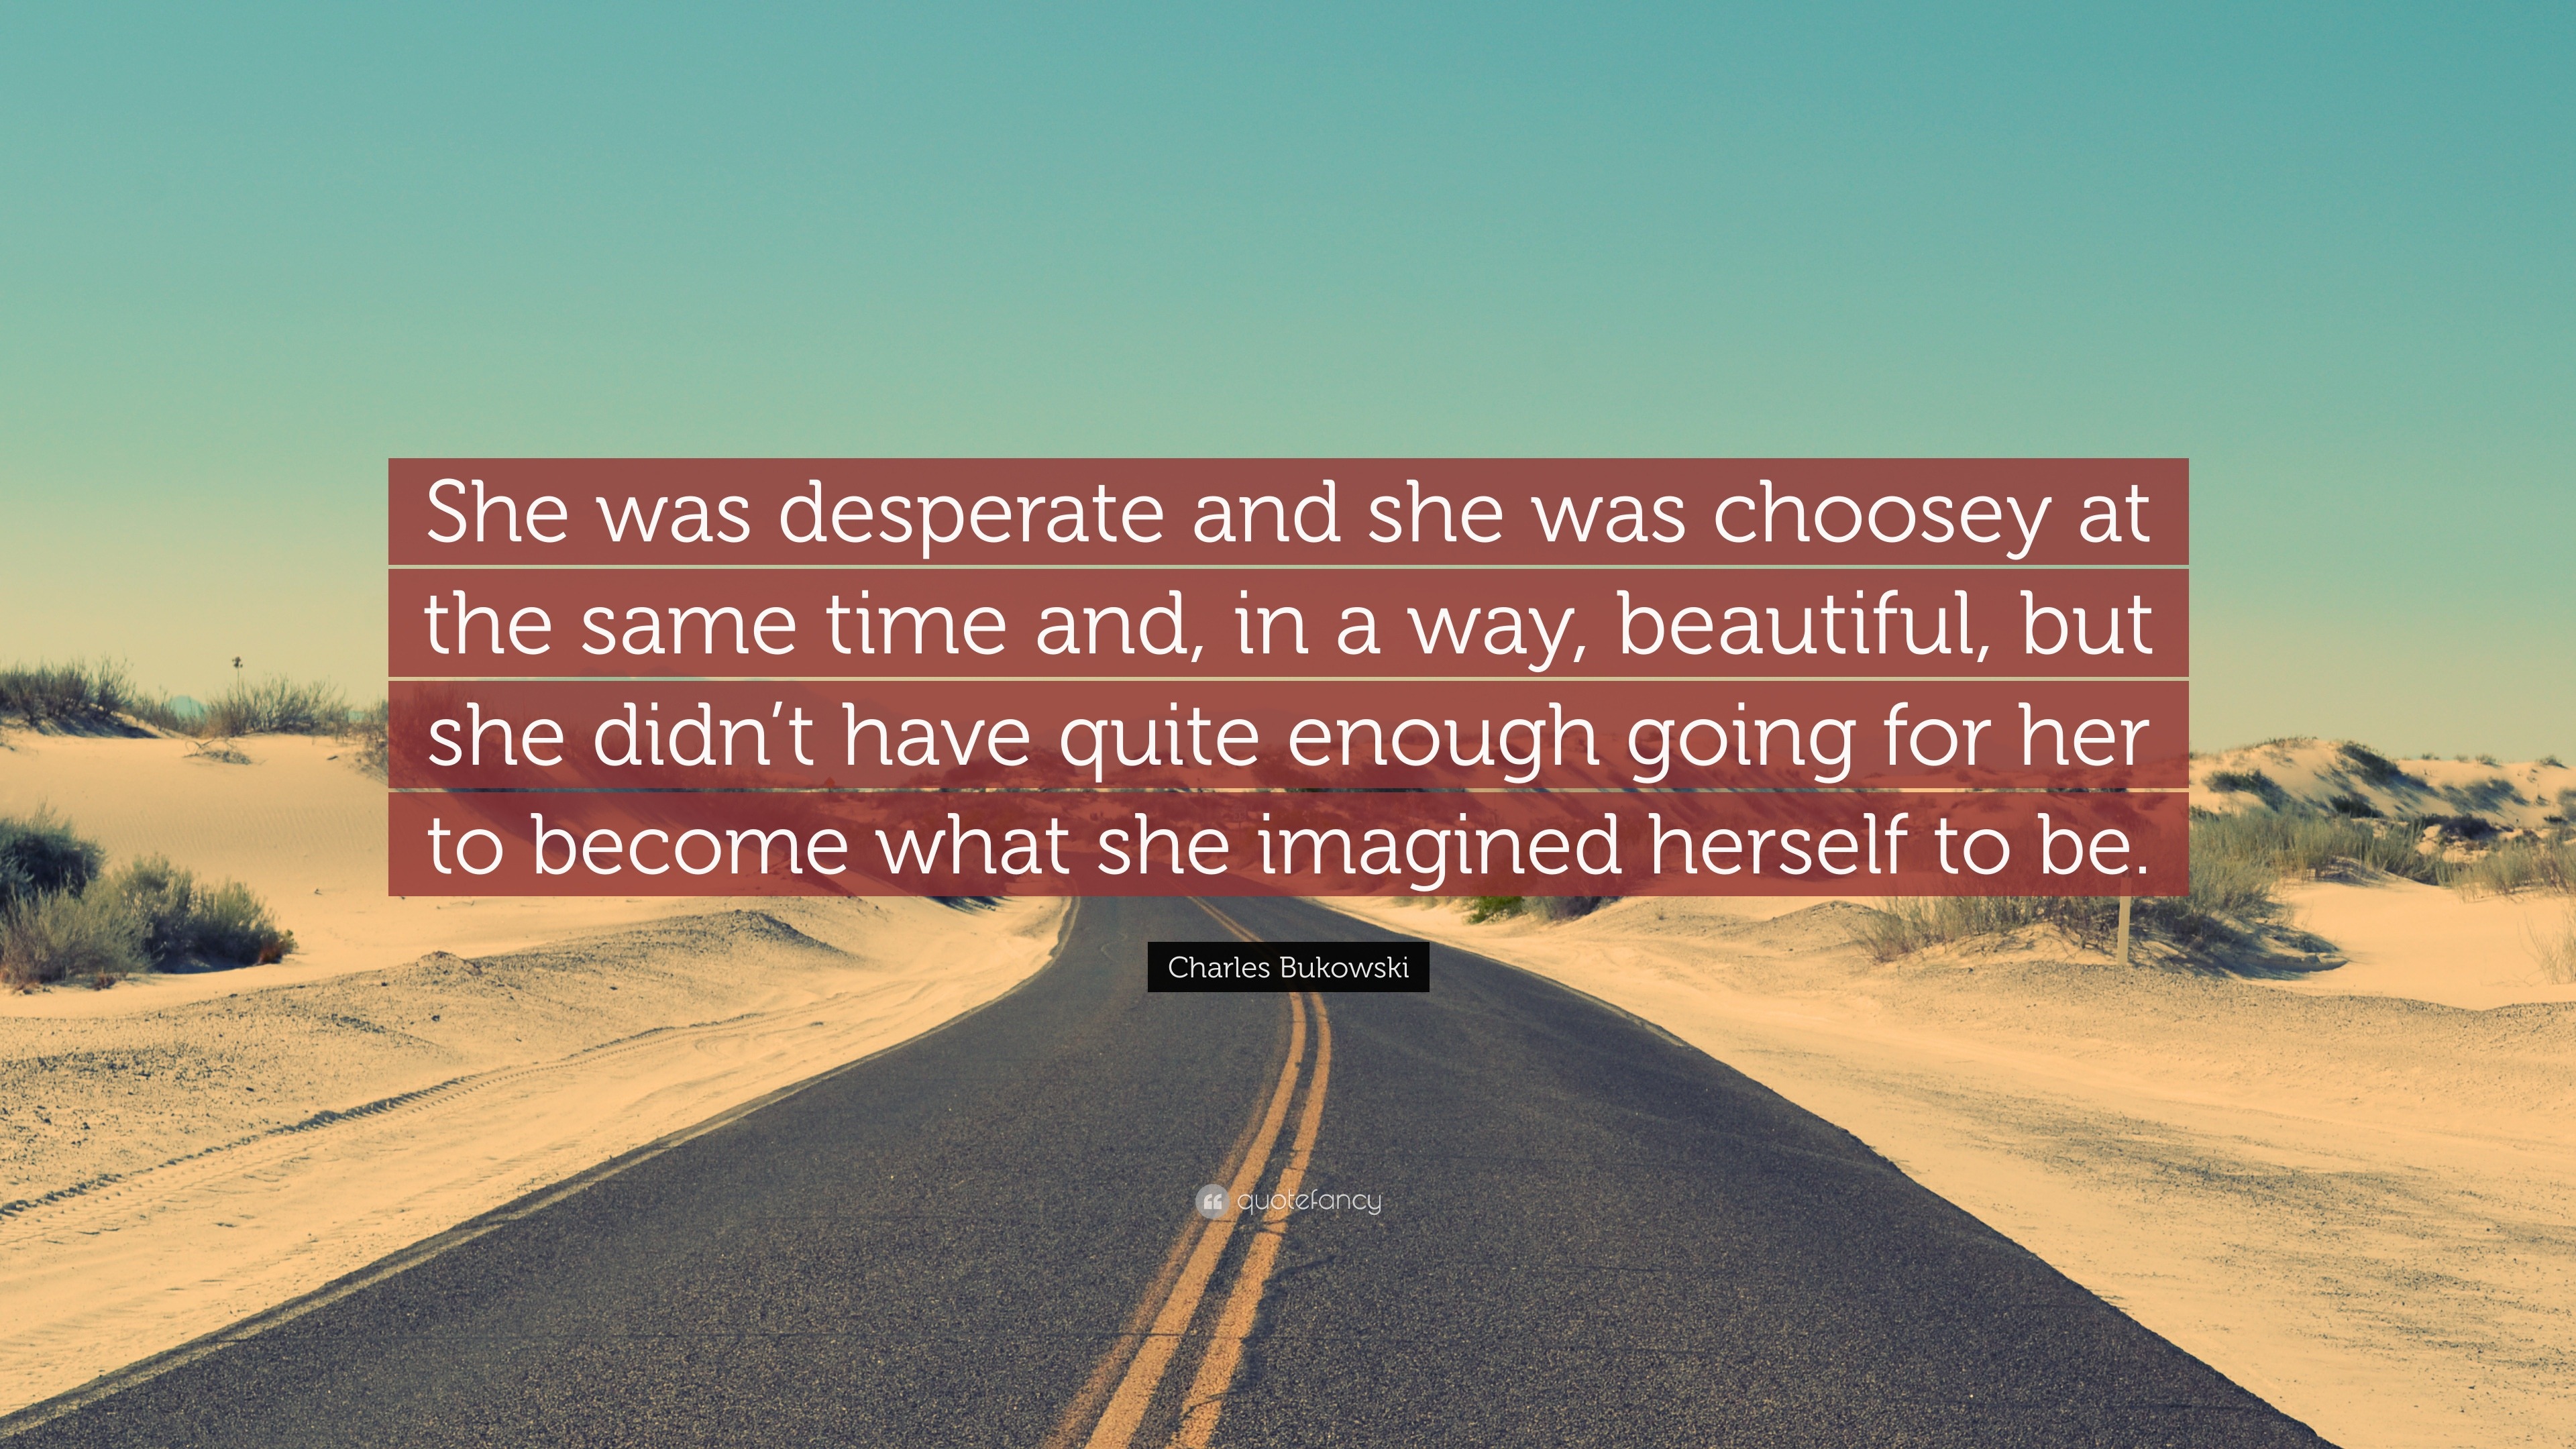 Charles Bukowski Quote: “She was desperate and she was choosey at the ...